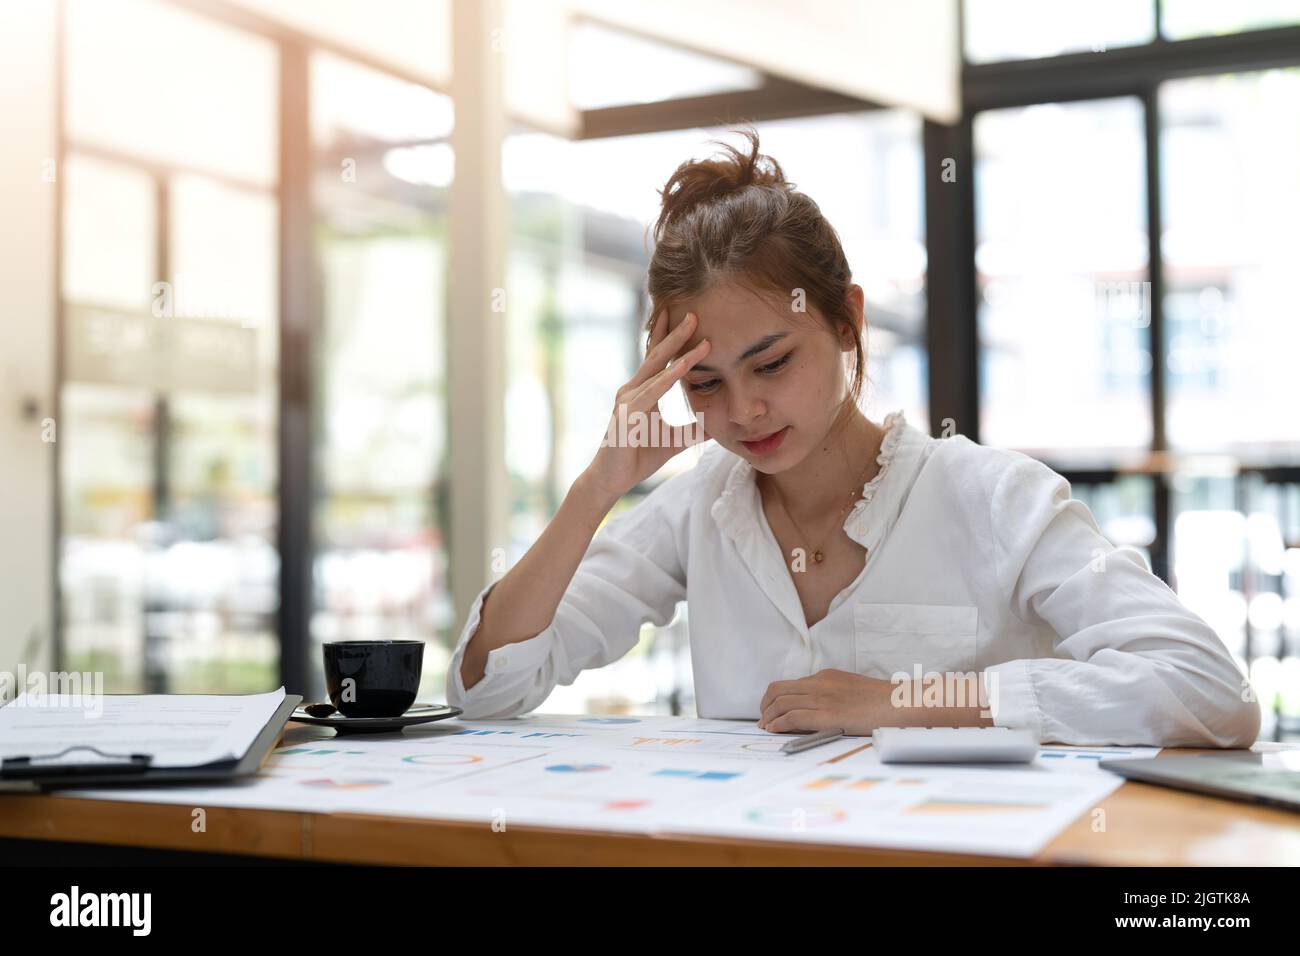 Young asian Woman Office Worker Uses Laptop, Feels Sudden Burst of Pain, Headache, Migraine. Overworked Accountant Feeling Project Pressure, Stress Stock Photo